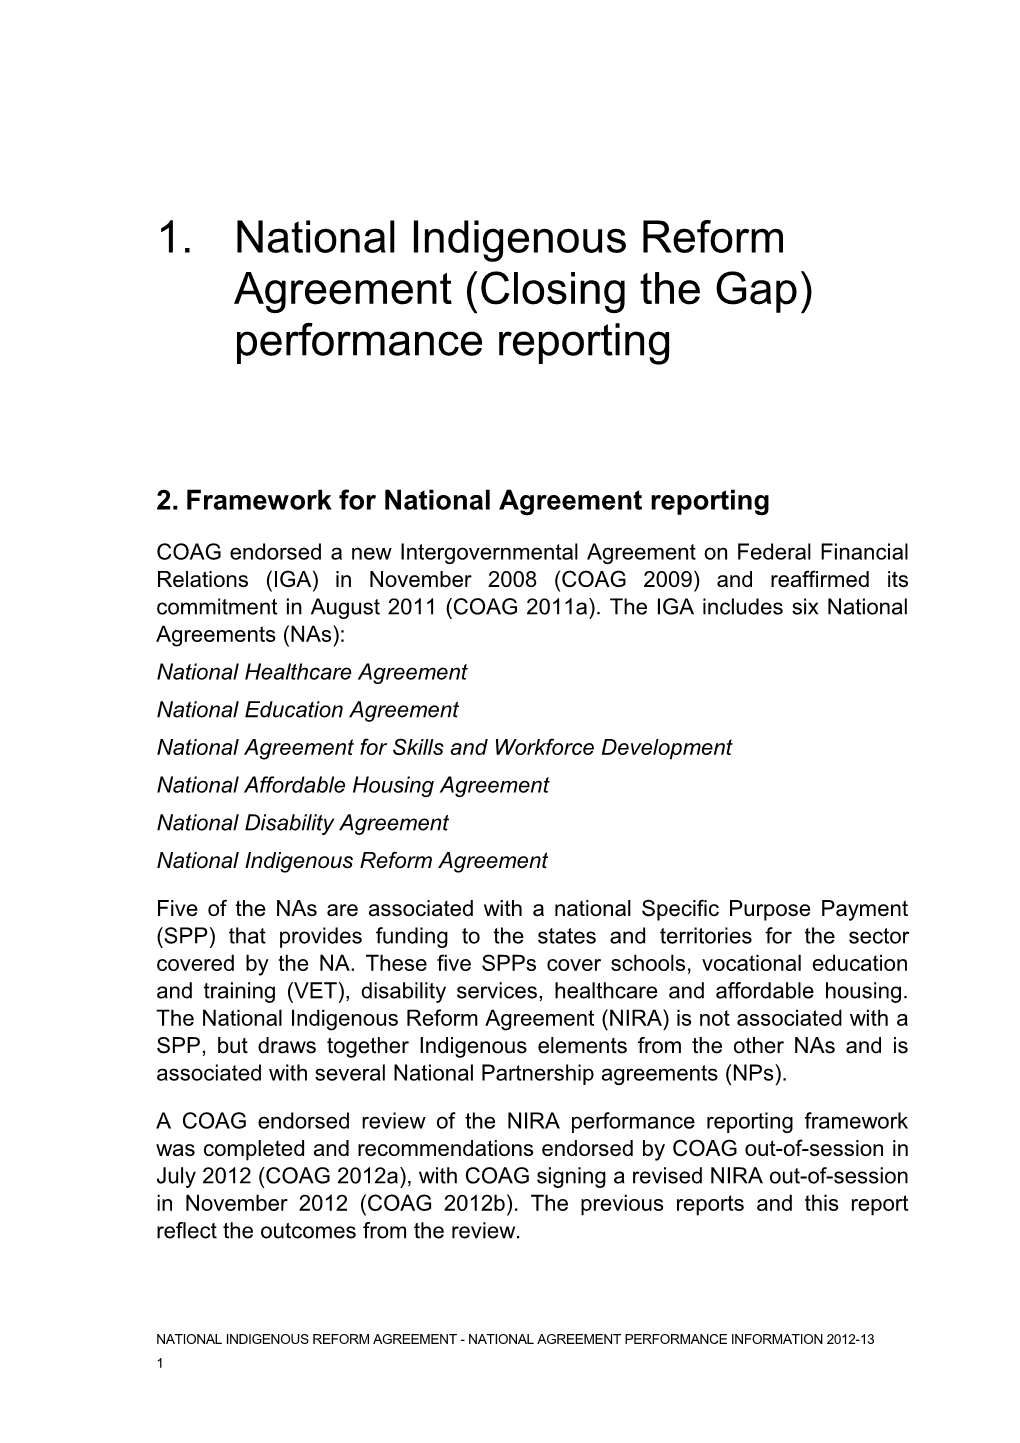 National Indigenous Reform Agreement - National Agreement Performance Information 2012-13